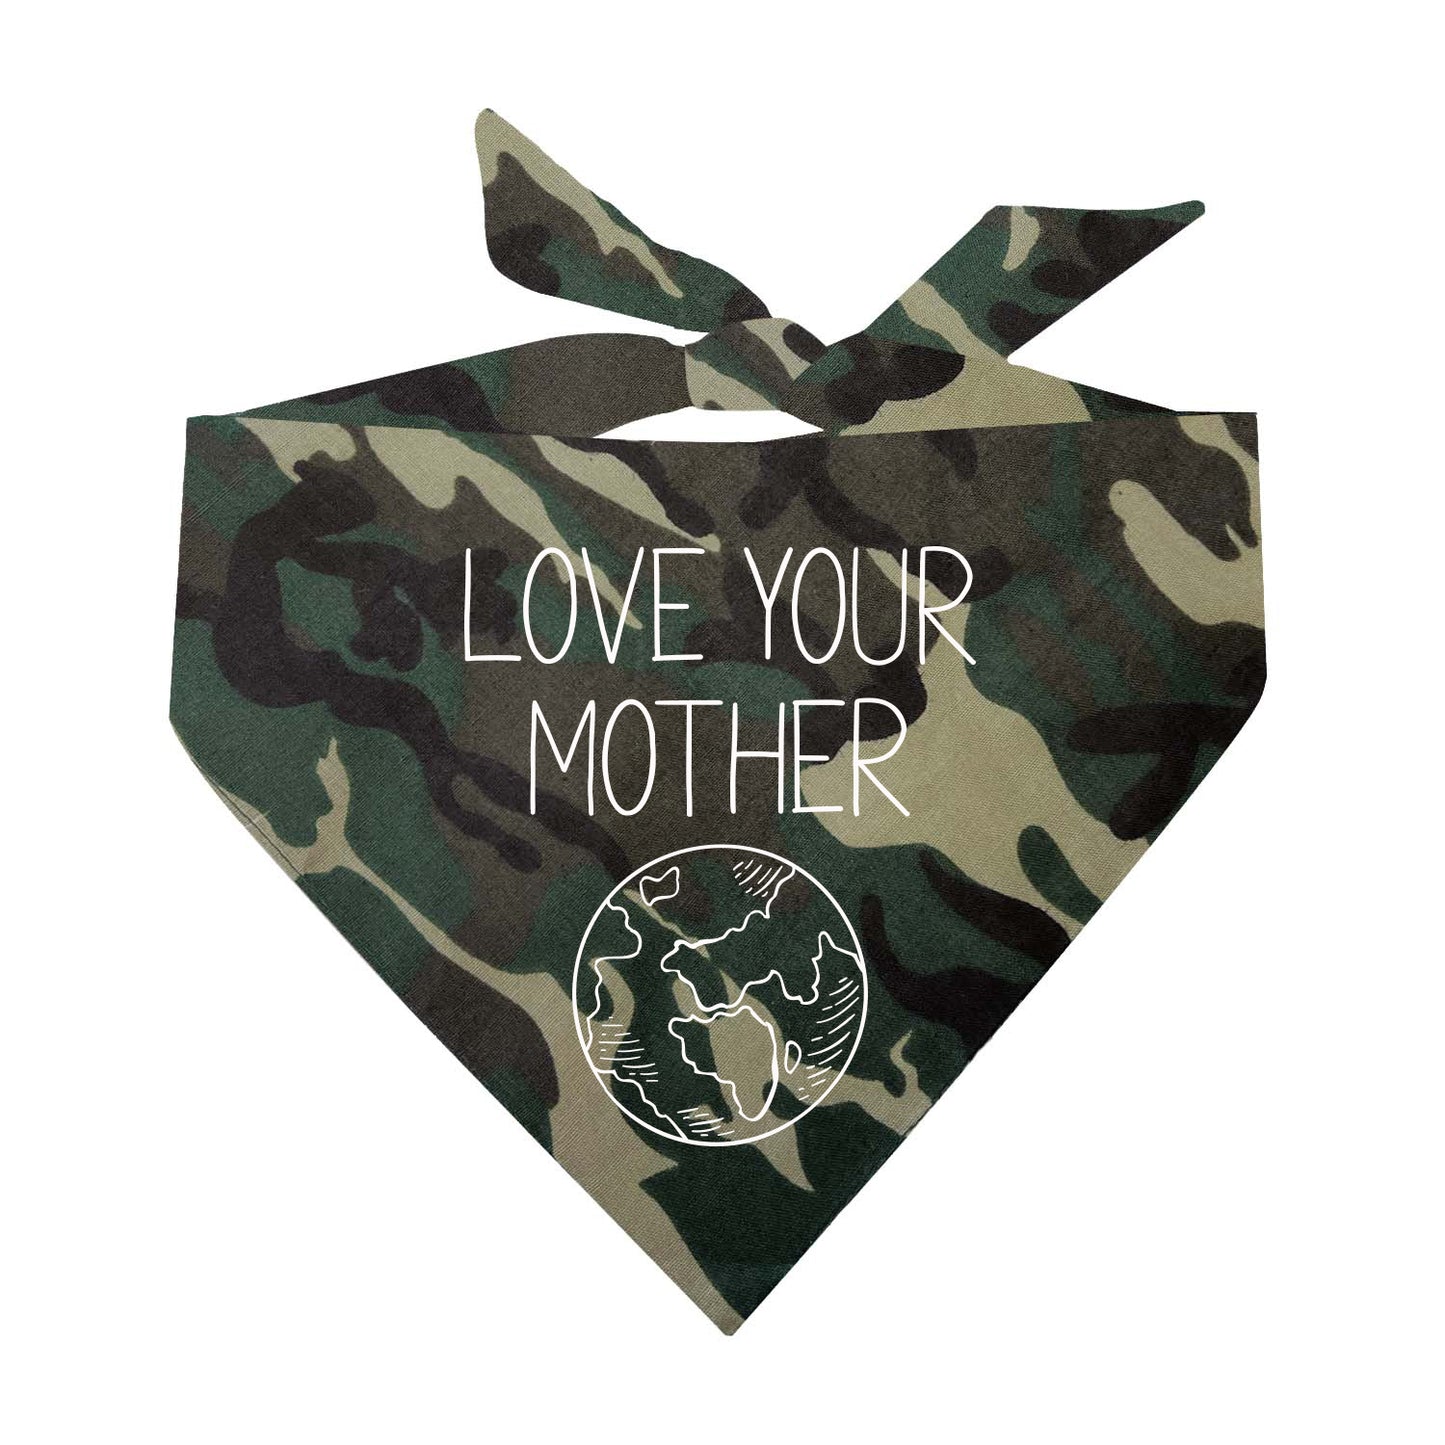 Love Your Mother Earth Triangle Dog Bandana (Assorted Colors)